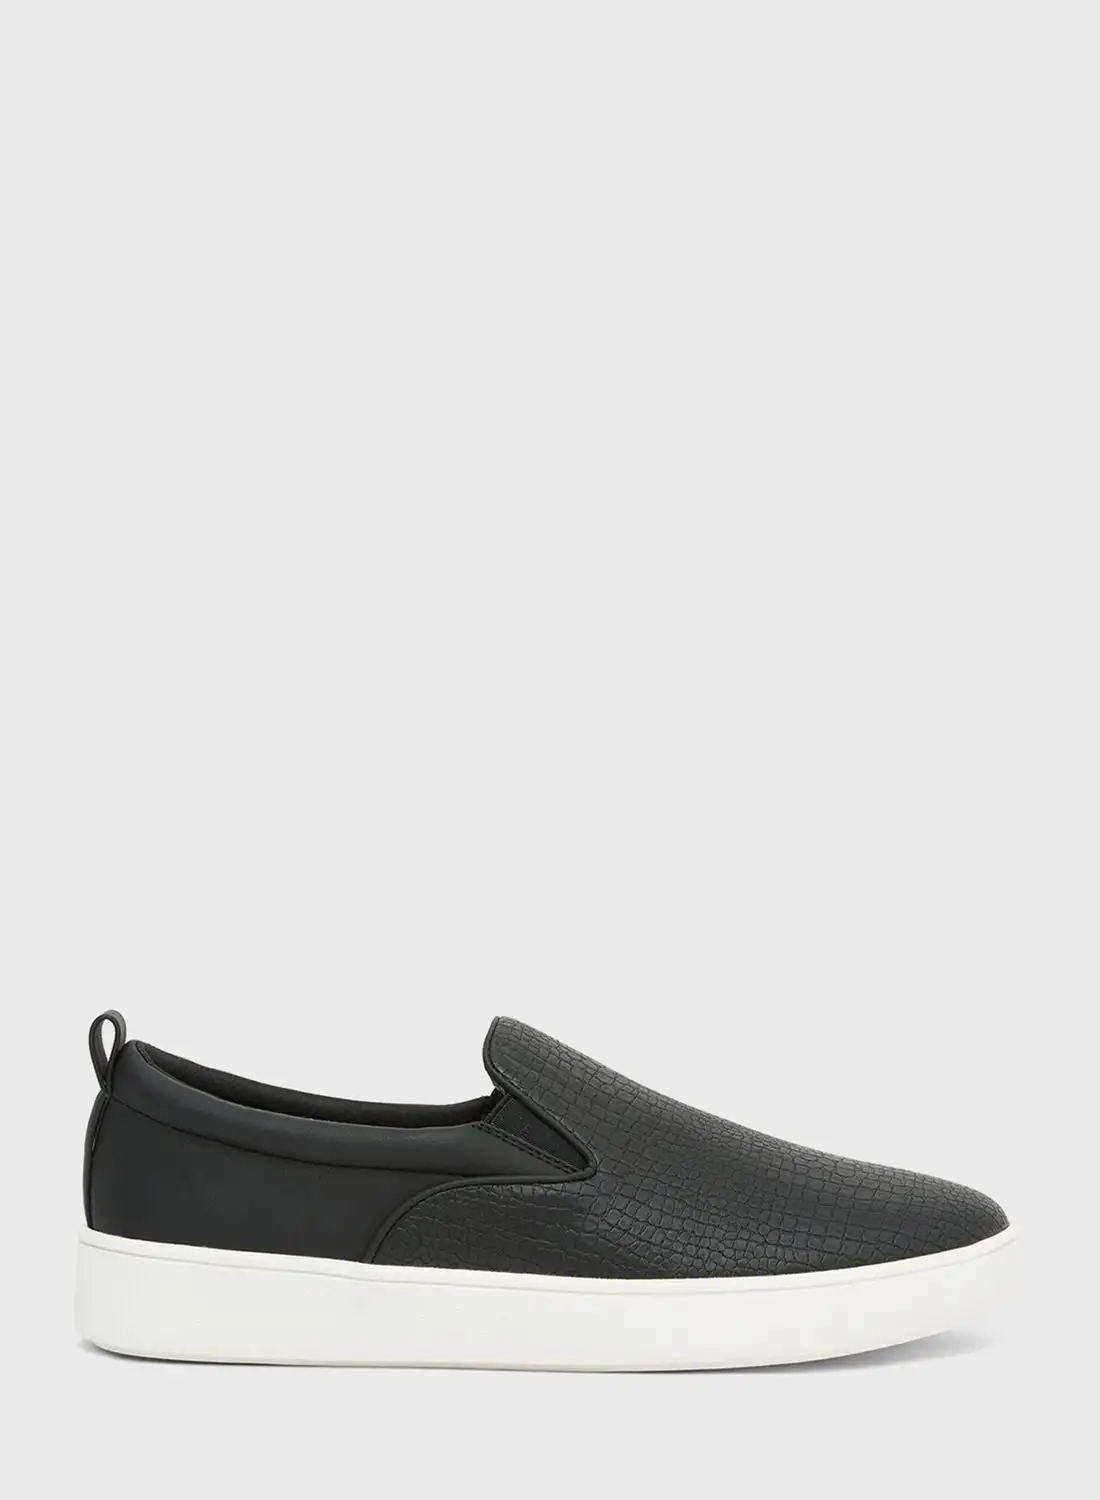 CALL IT SPRING Textured Slip-On Shoes